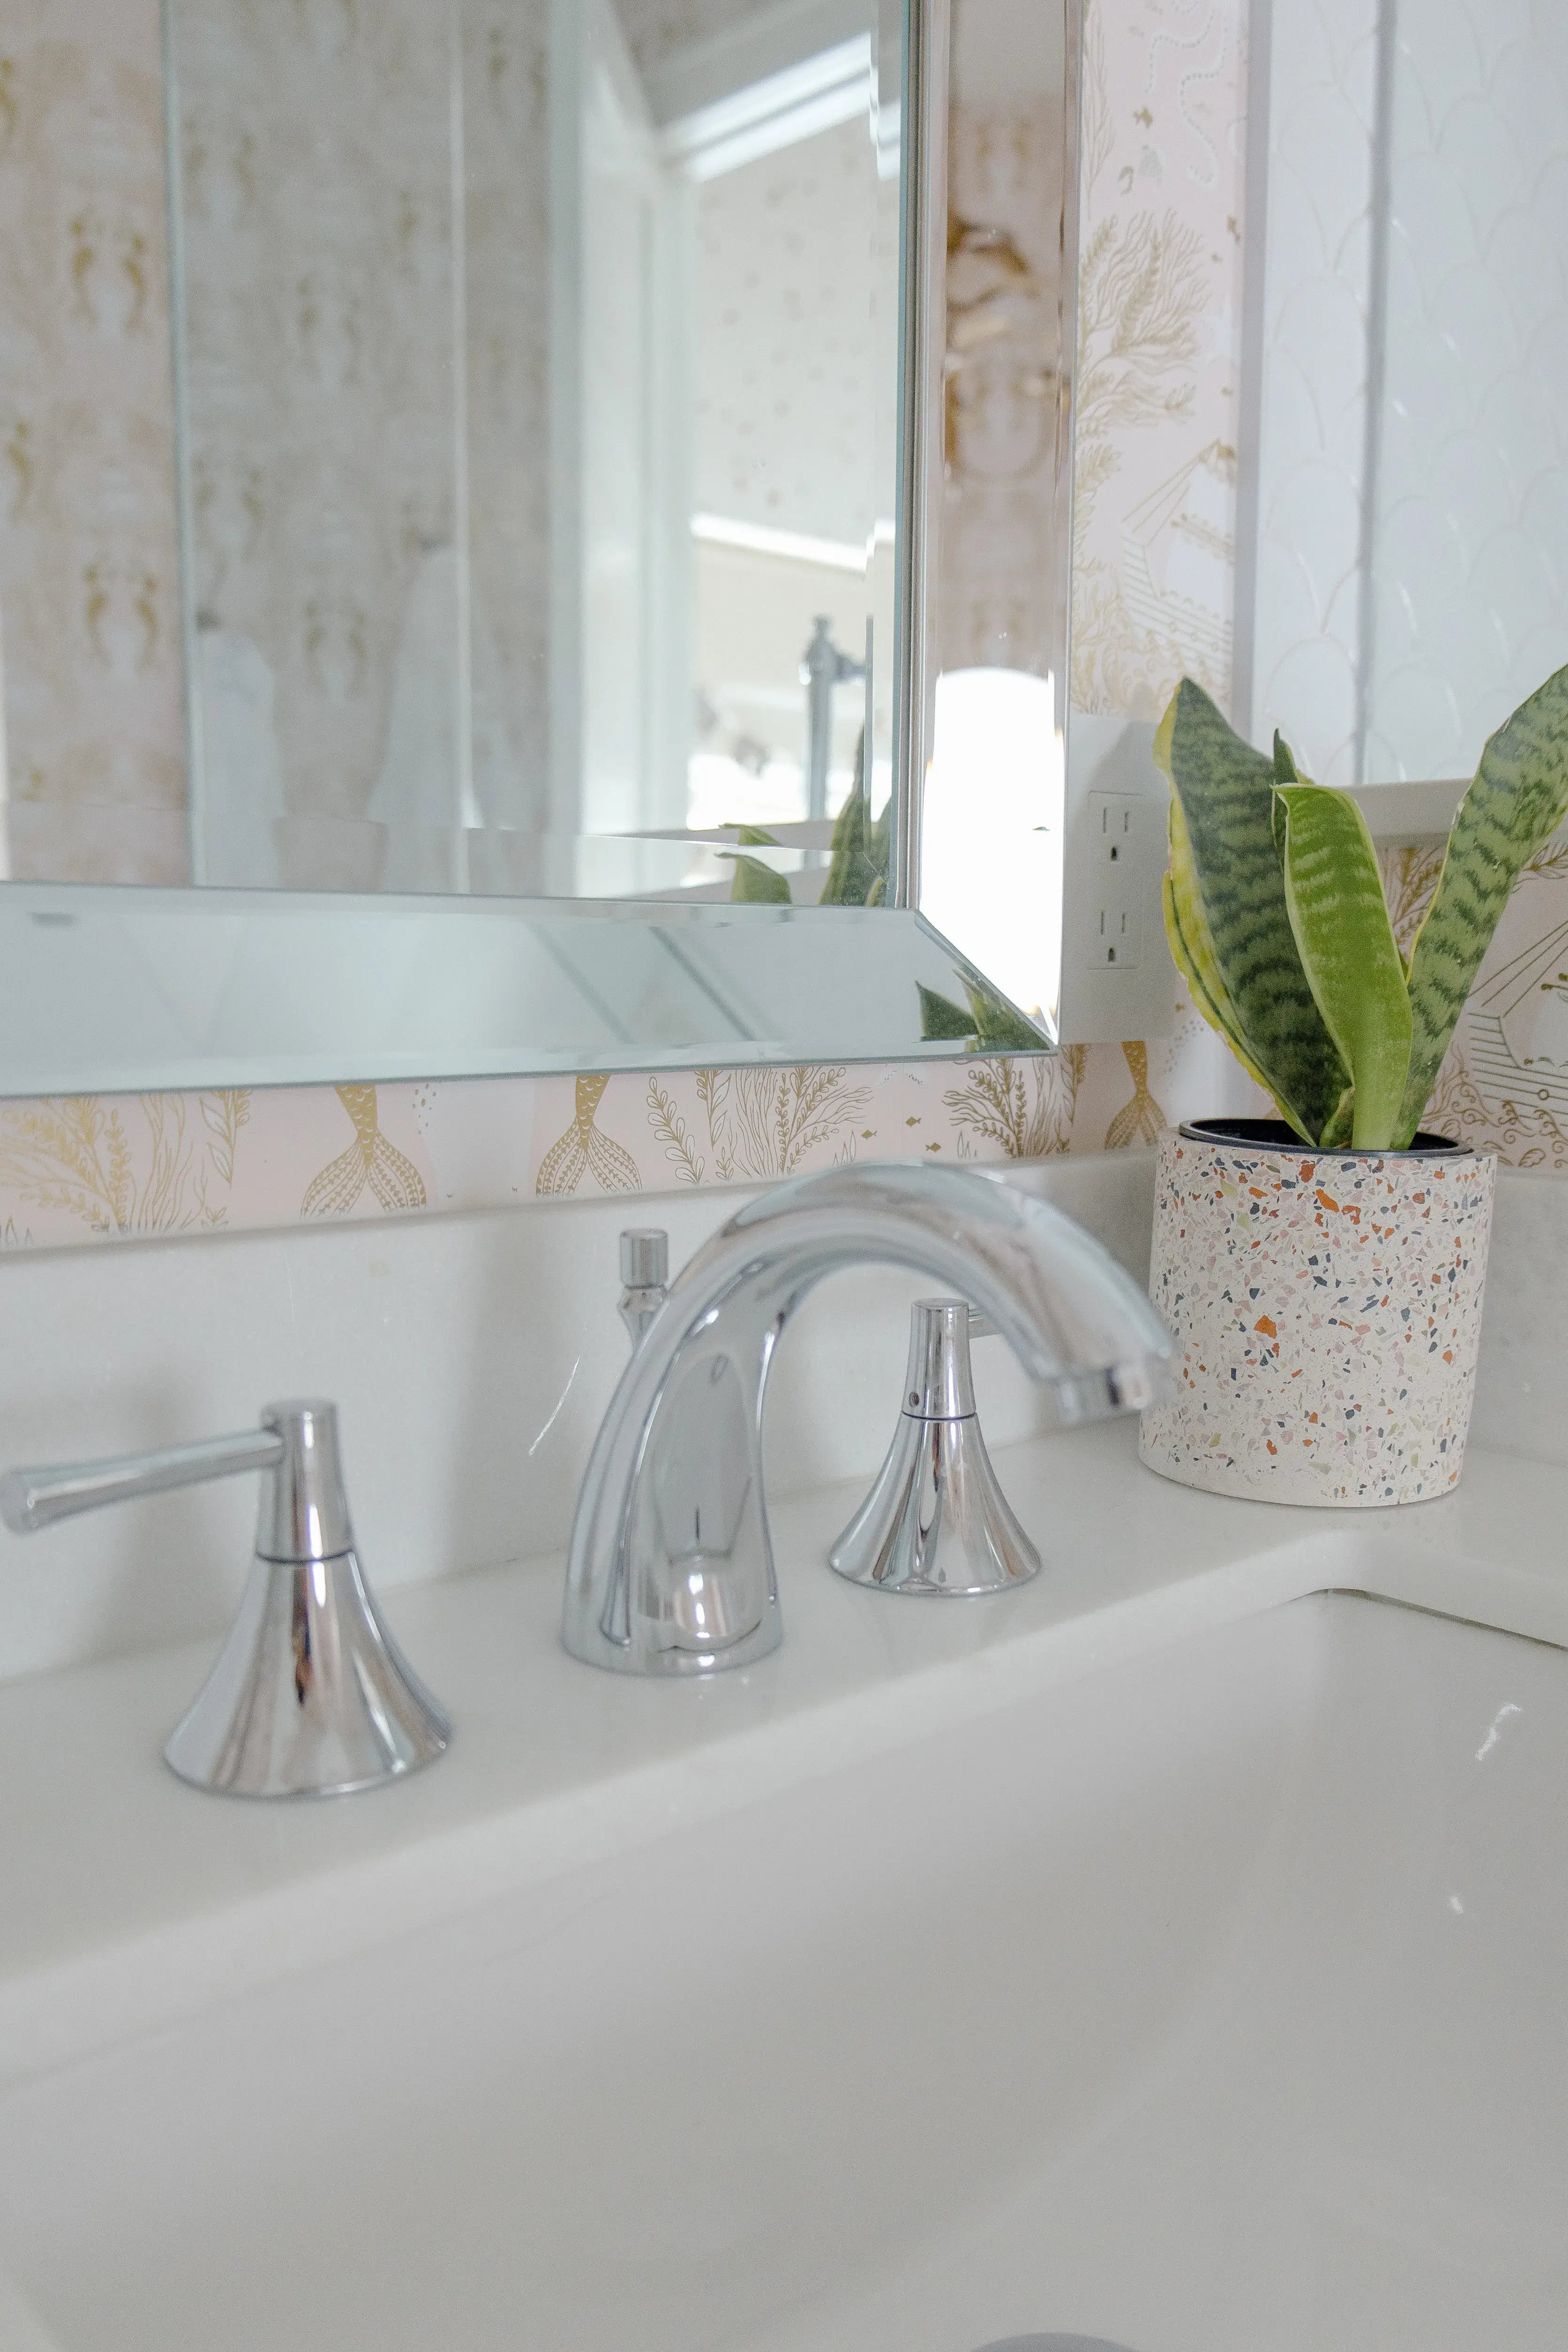 silver faucet with snake plant next to it